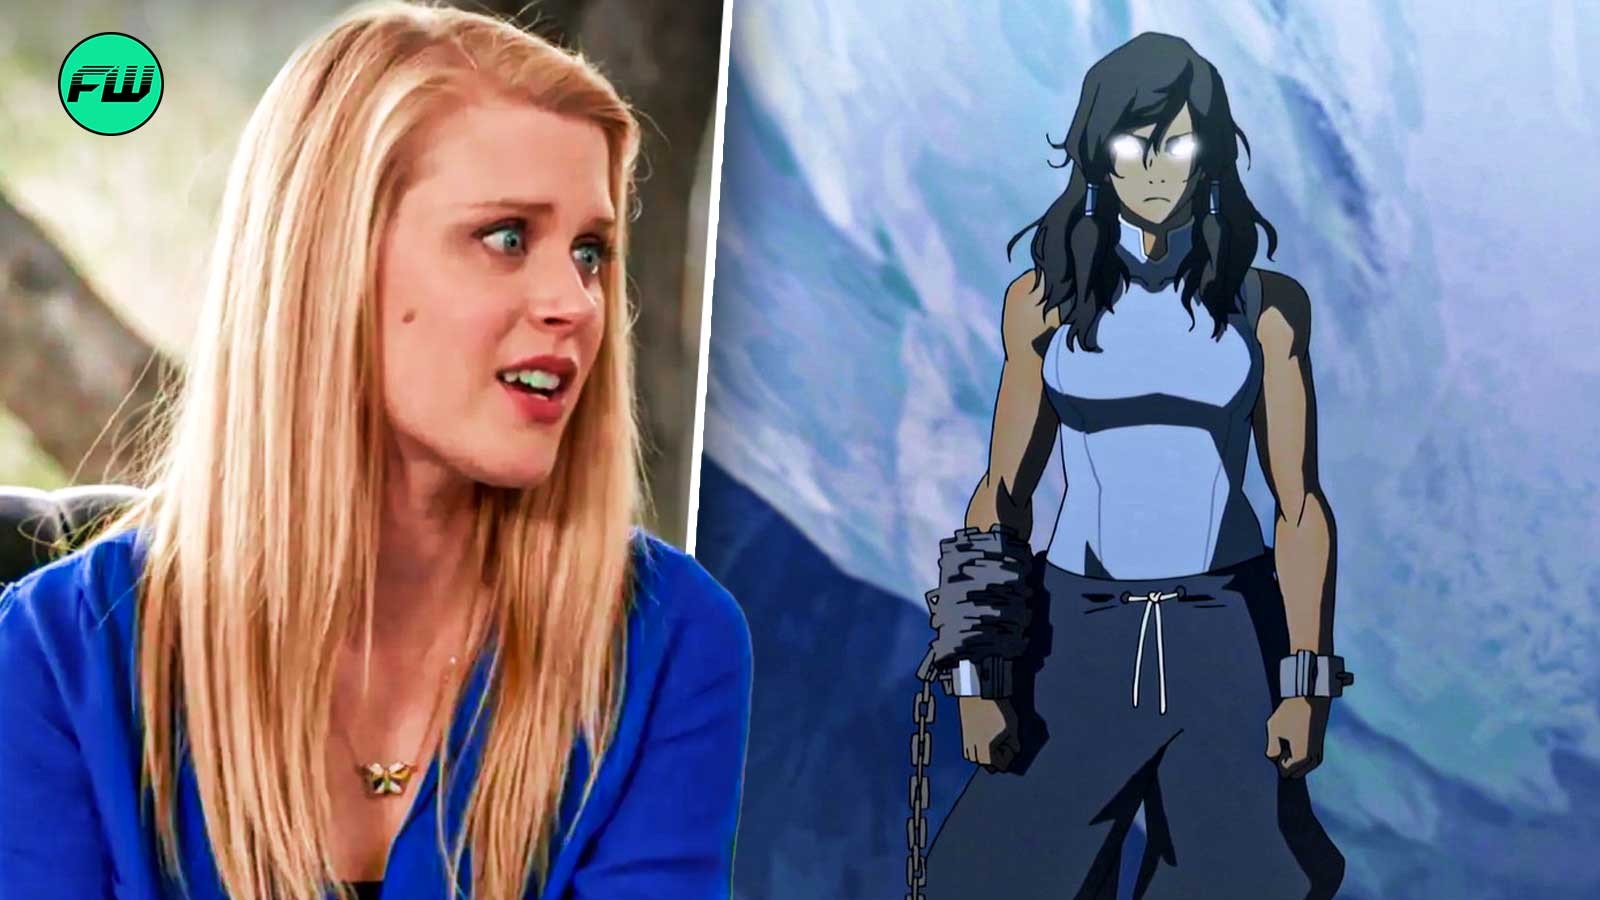 The voice actress of “The Legend of Korra”, Janet Varney, will never forget how she was made to feel guilty for playing a lesbian character